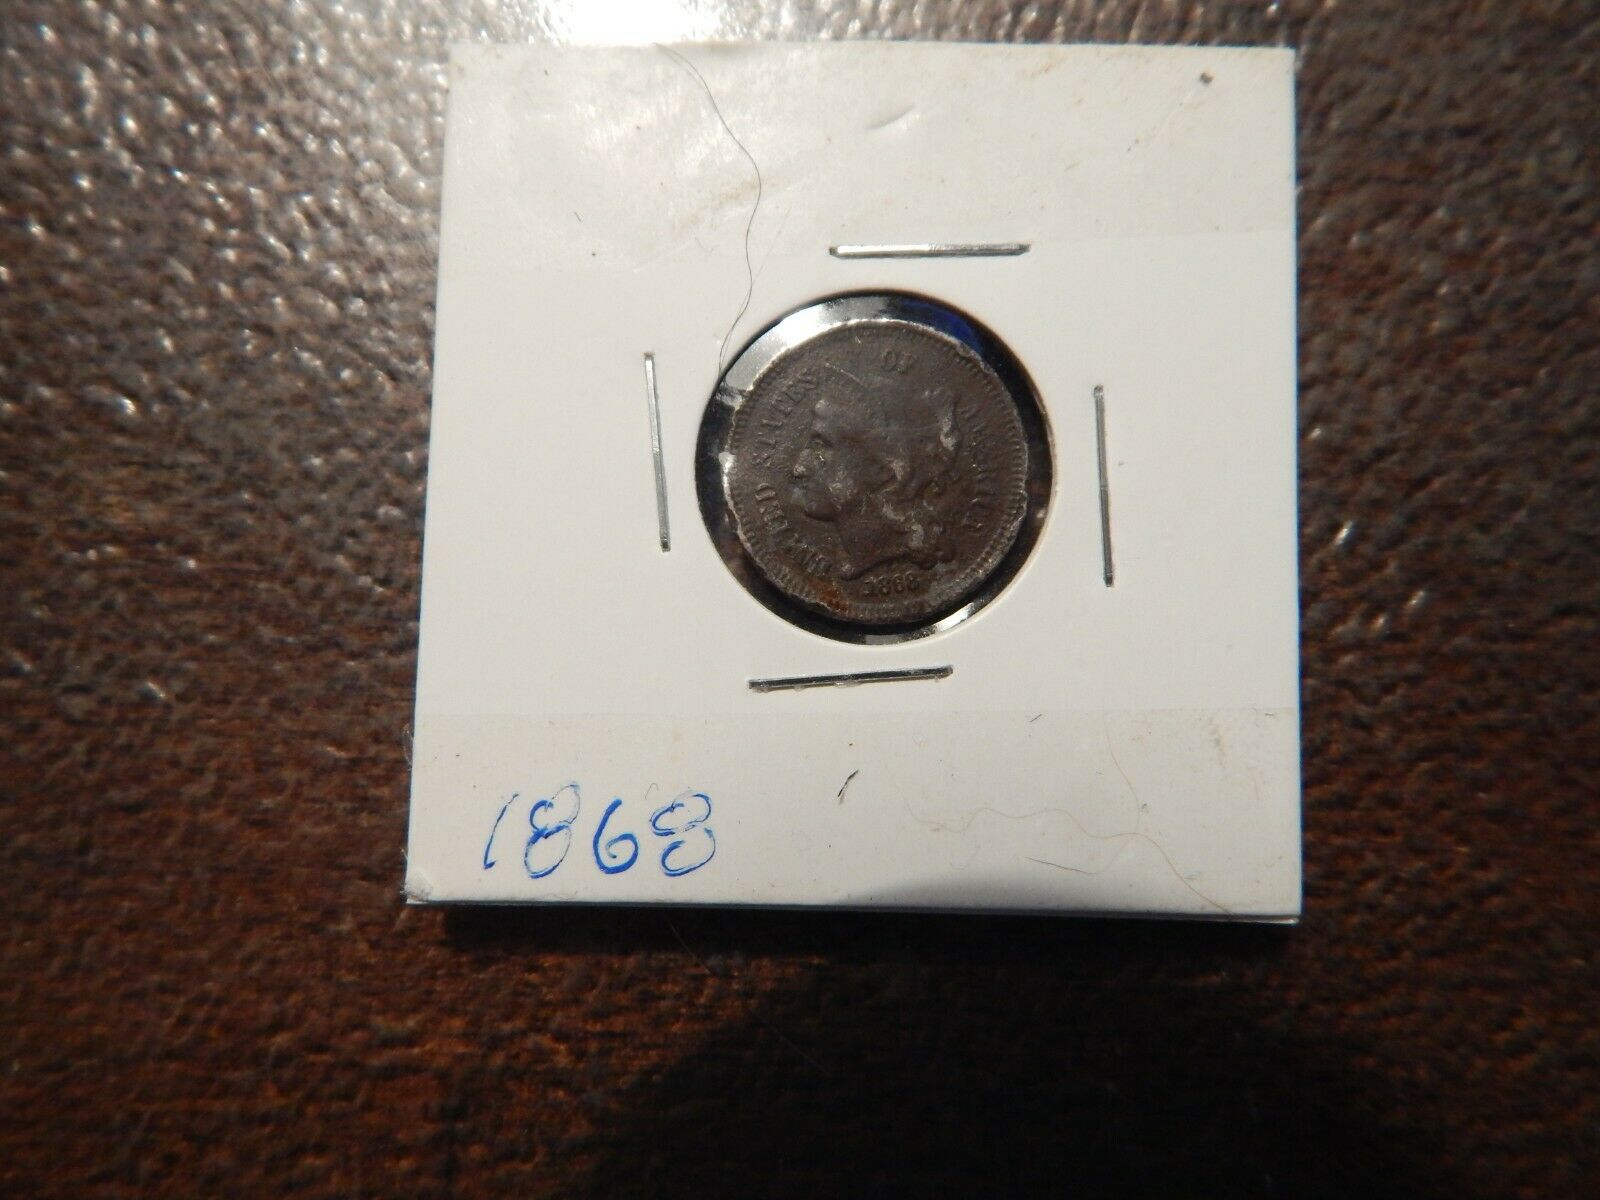 1868 circulated 3 cent piece nickel US Mint circulated/ungraded